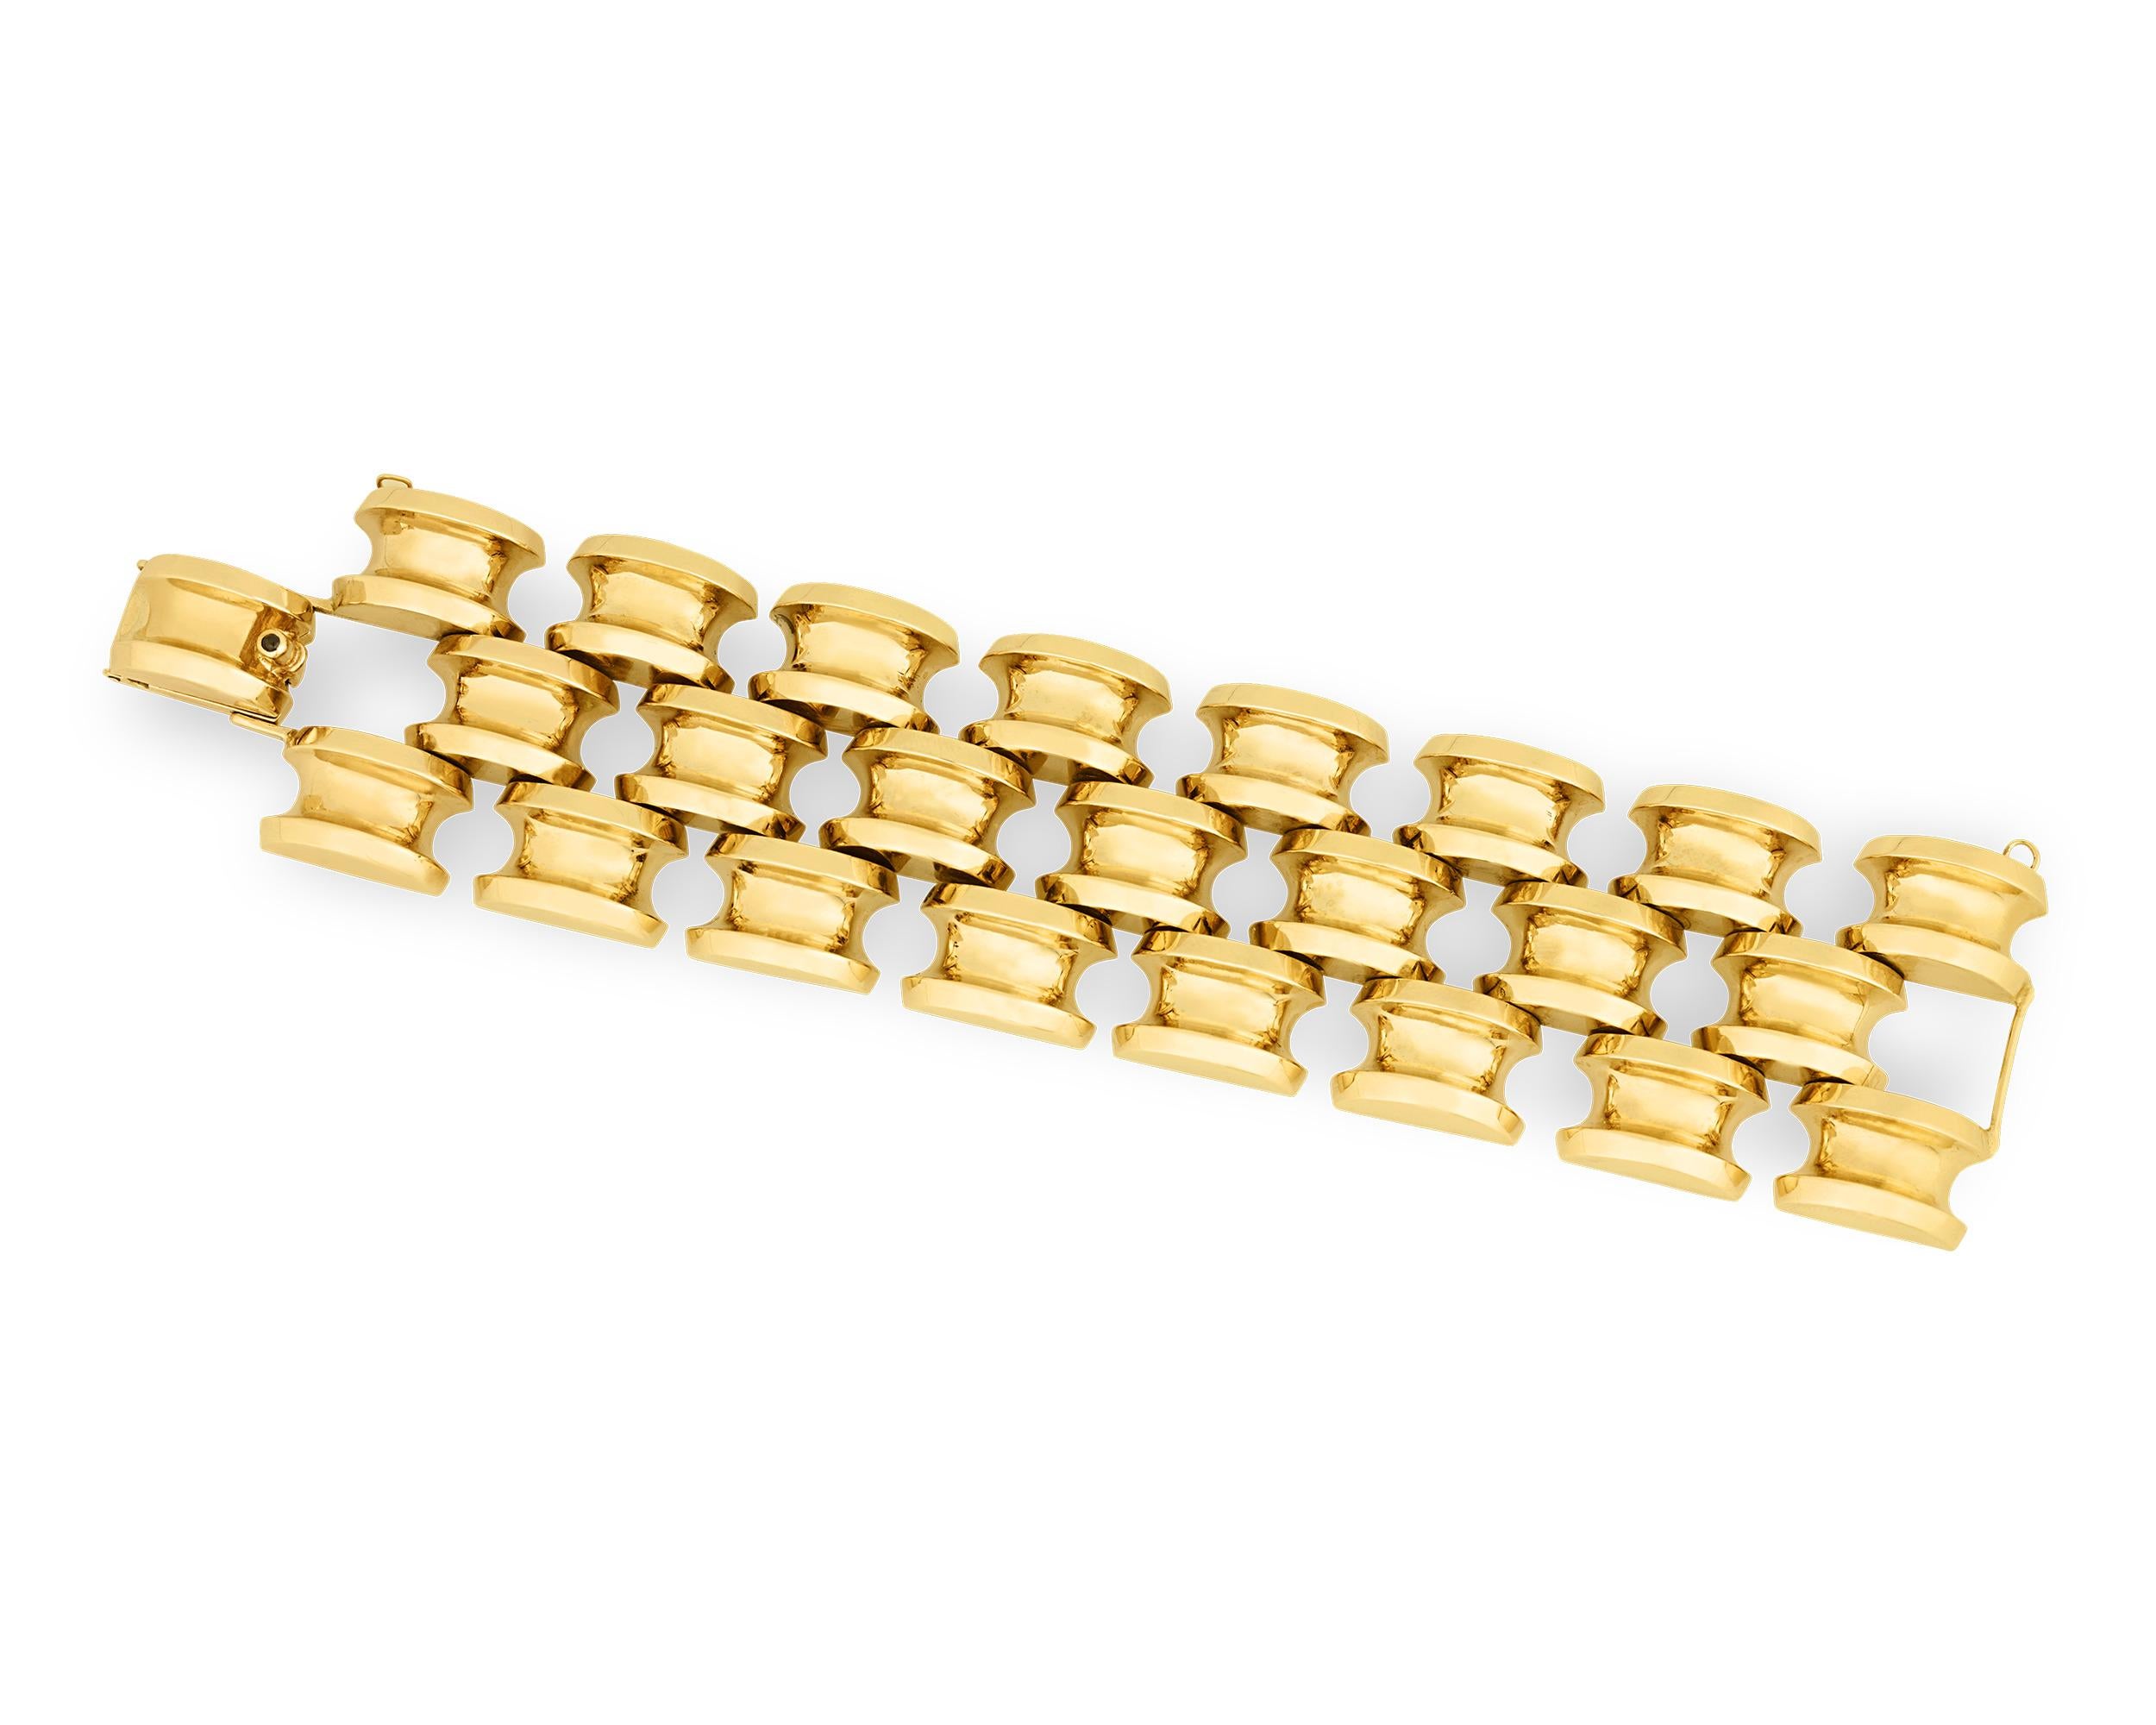 Bold and sophisticated, this elegant 14K yellow gold bracelet by Tiffany & Co. showcases the chic and fashionable side of the classic jeweler. Crafted of three large strands composed of artful oversized links, this bracelet embodies the expert